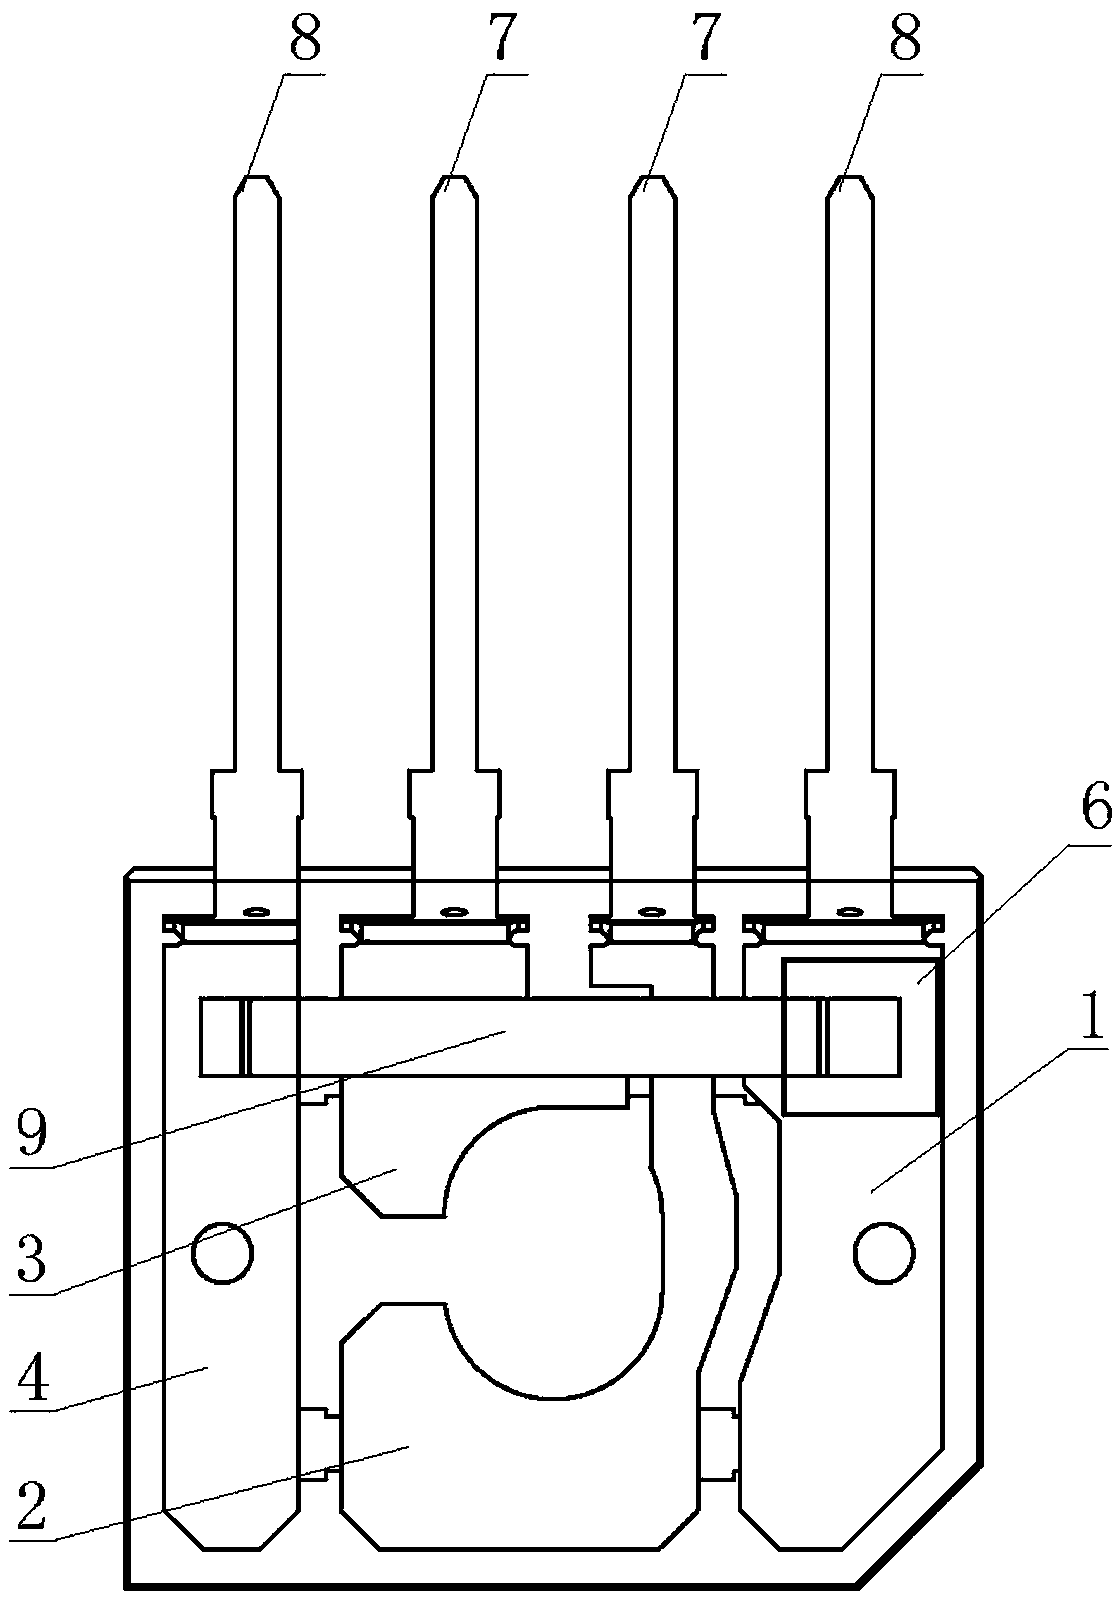 Direct-insertion rectification bridge device with output protection